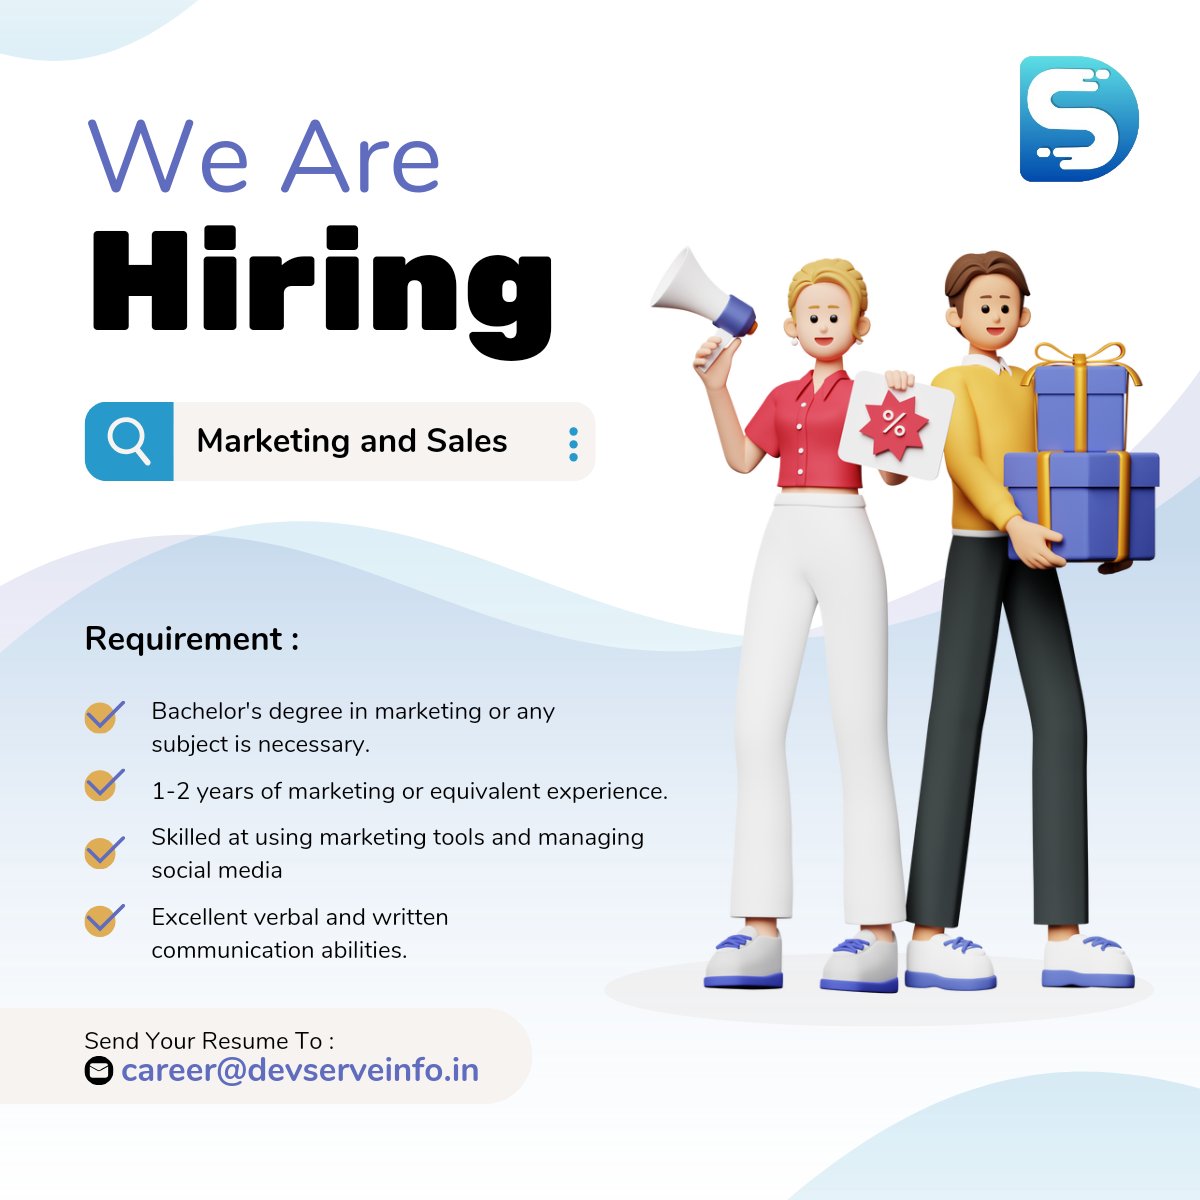 Marketing and Sales Intern at DevServe Info Location: Remote Send Resume: career@devserveinfo.in What We Offer: For each client acquired, you will receive a commission. #connect #hiring #internship #marketingagency #Marketing #hiringalert